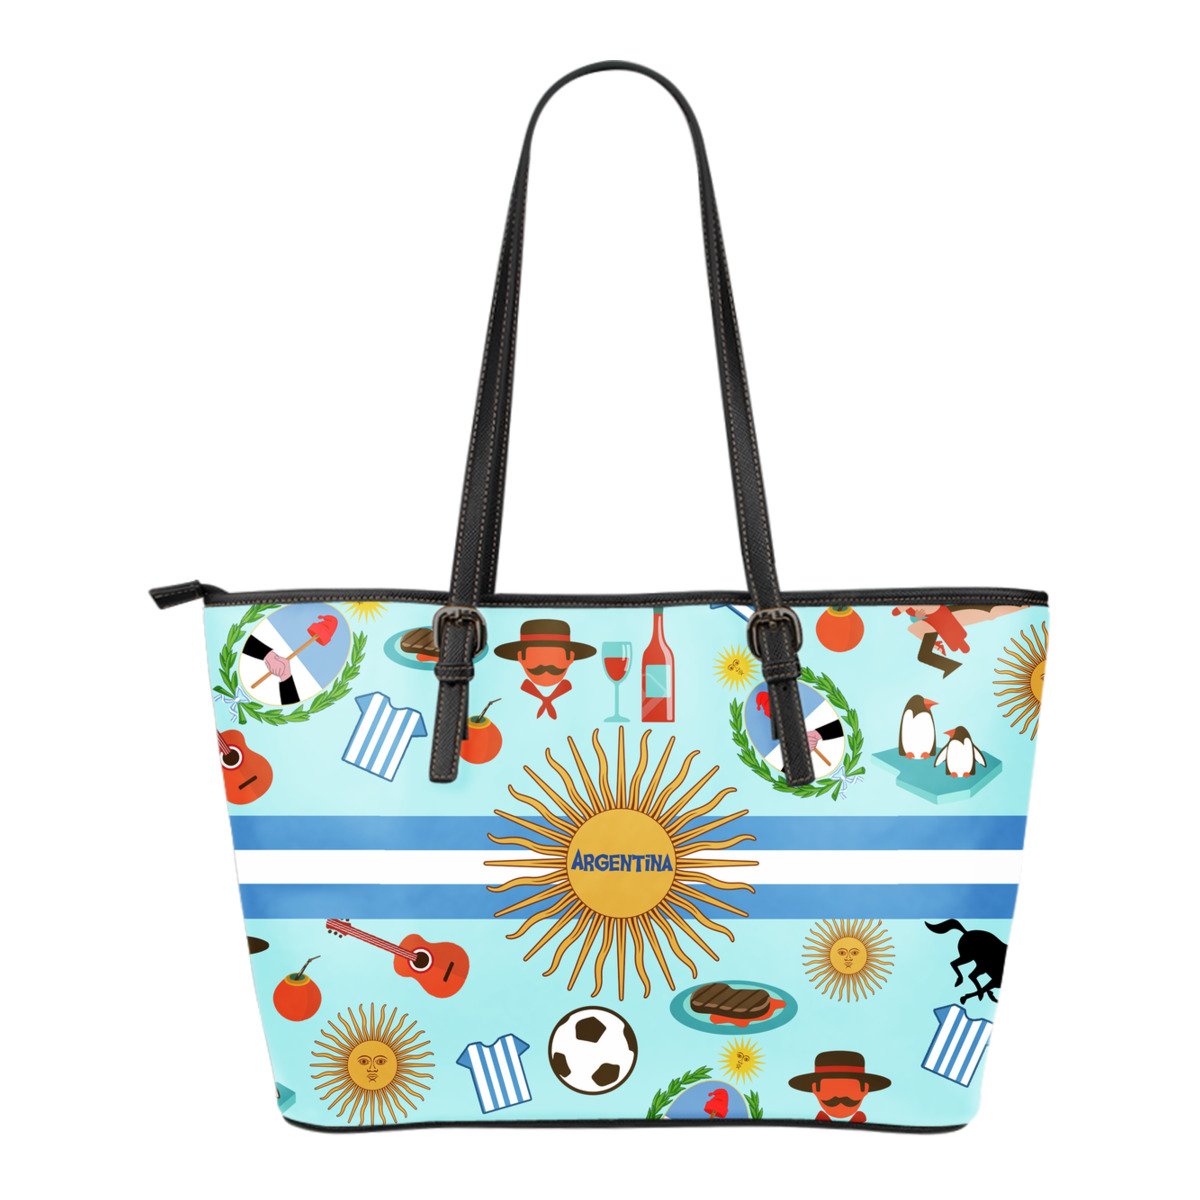 argentina-bags-argentina-symbols-small-leather-tote-bag